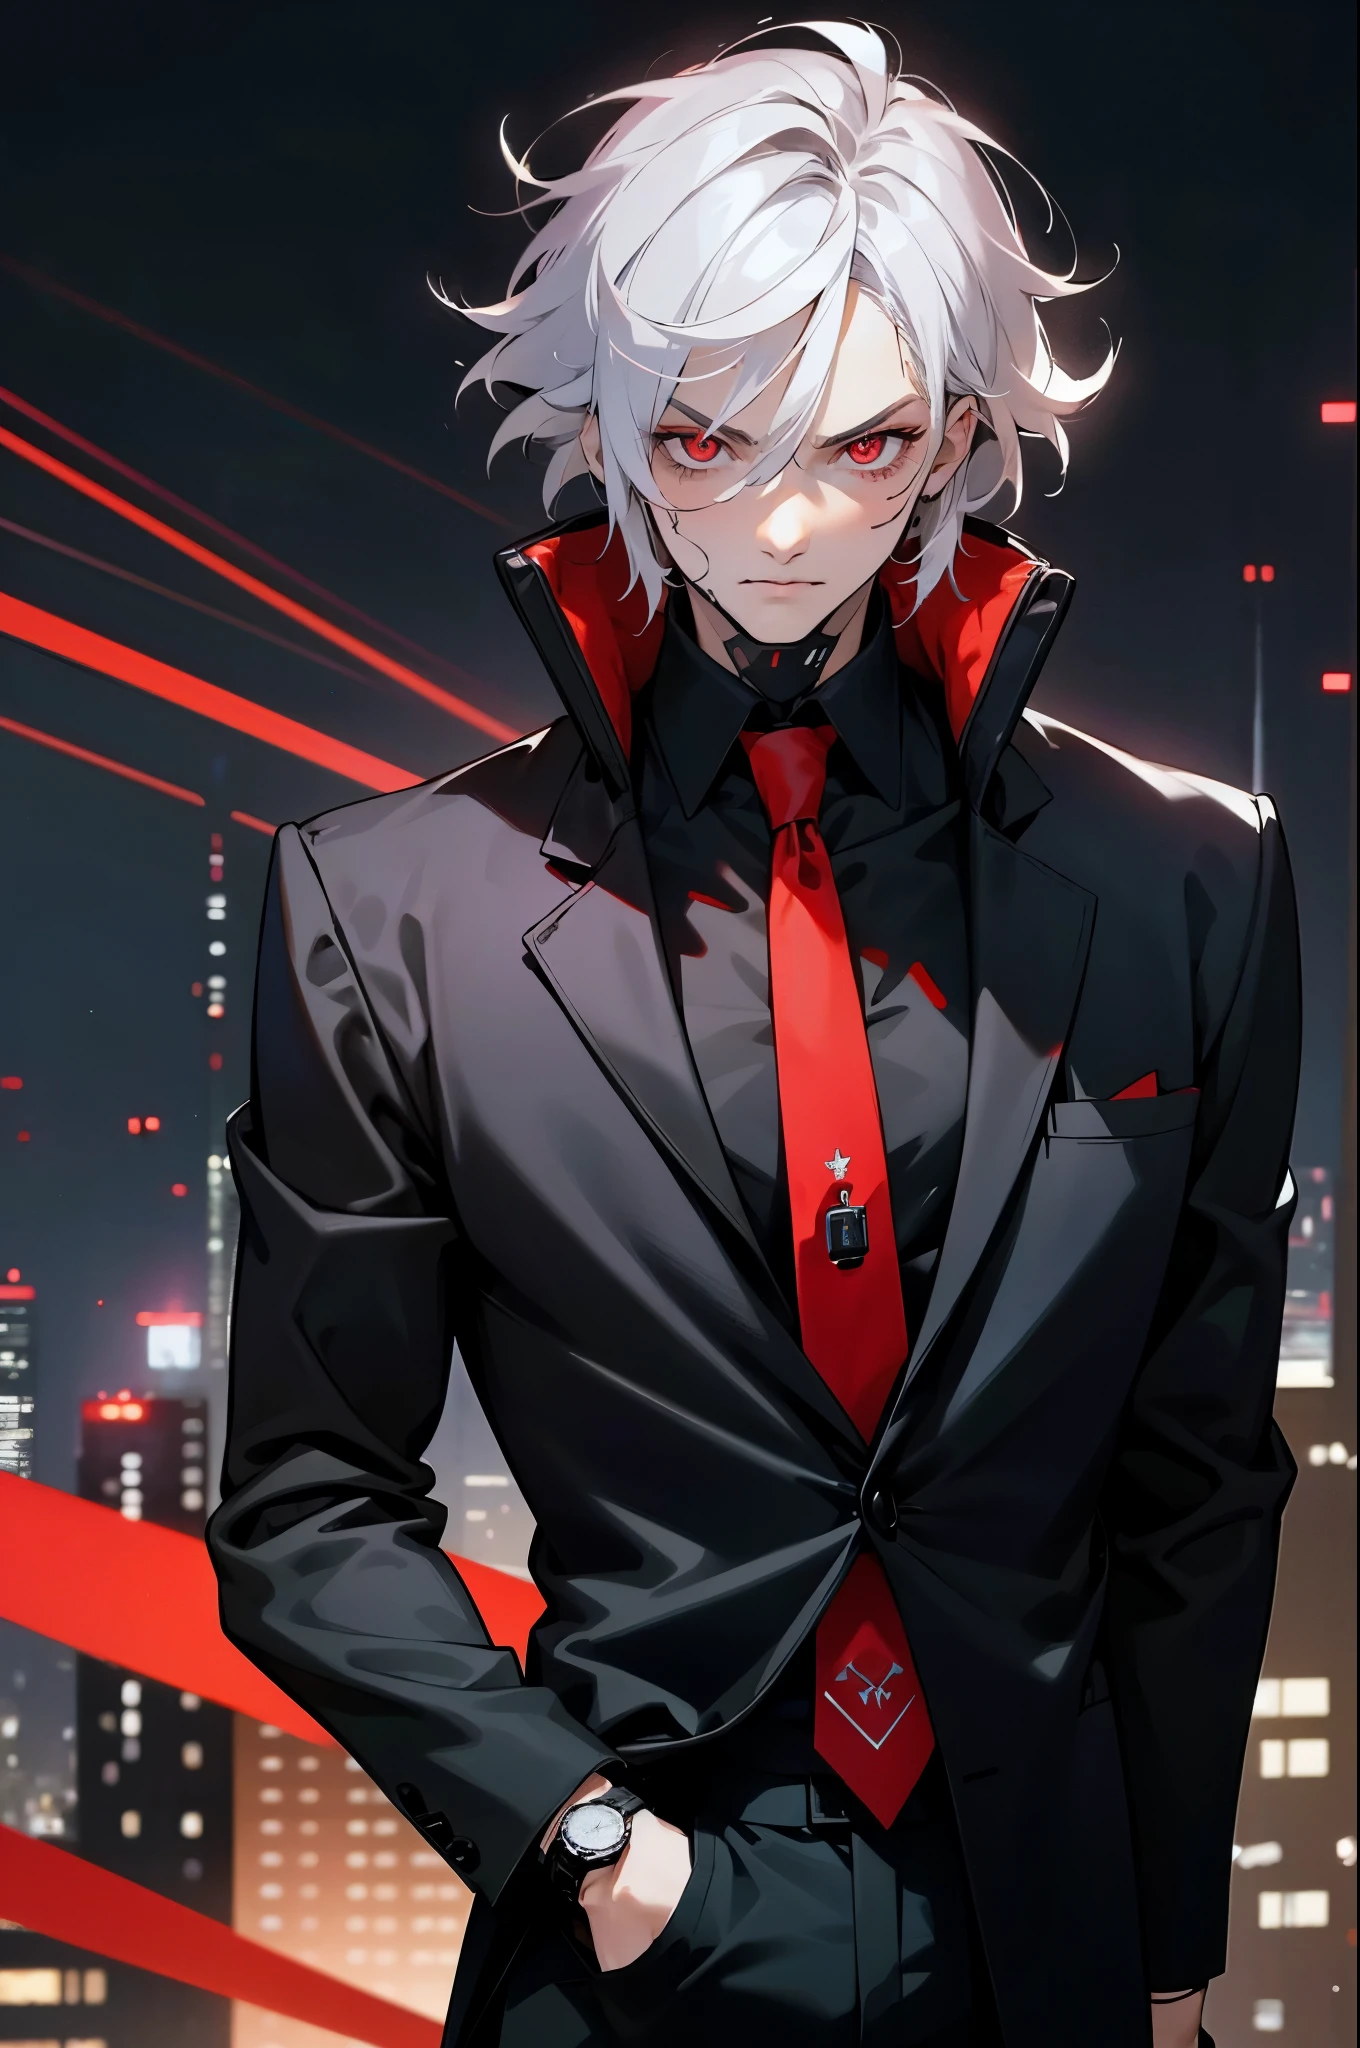 1male, Adult, Silver Hair, Short Hair, Black Suit, Red Tie, Red Eyes, Perfect Generation, Perfect Eyes, Black Pants, Fancy Watch, Cybepunk Facial Implant, City, Night Time, Messy Hair, Serious Face